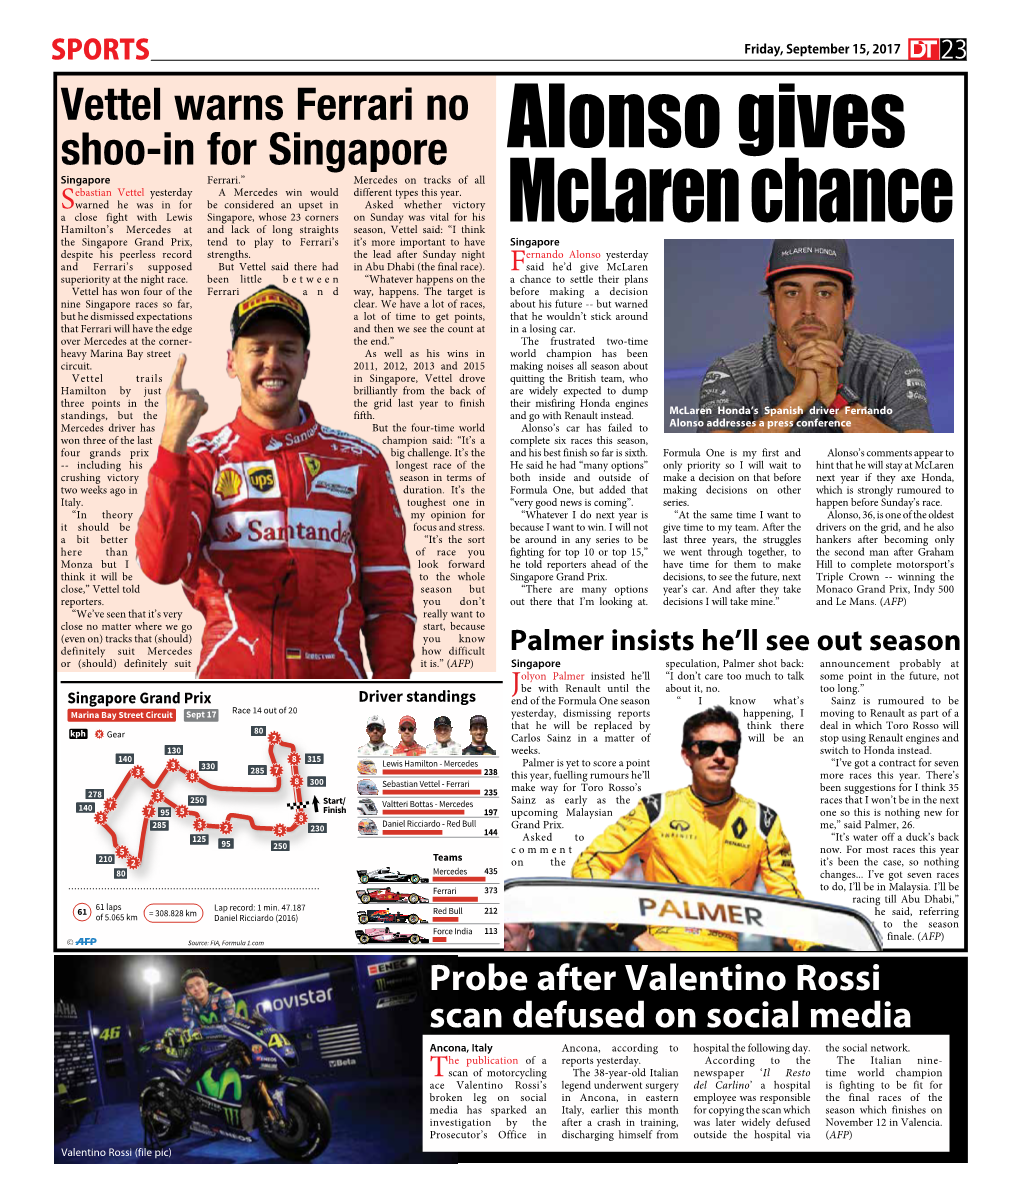 Alonso Gives Mclaren Chance